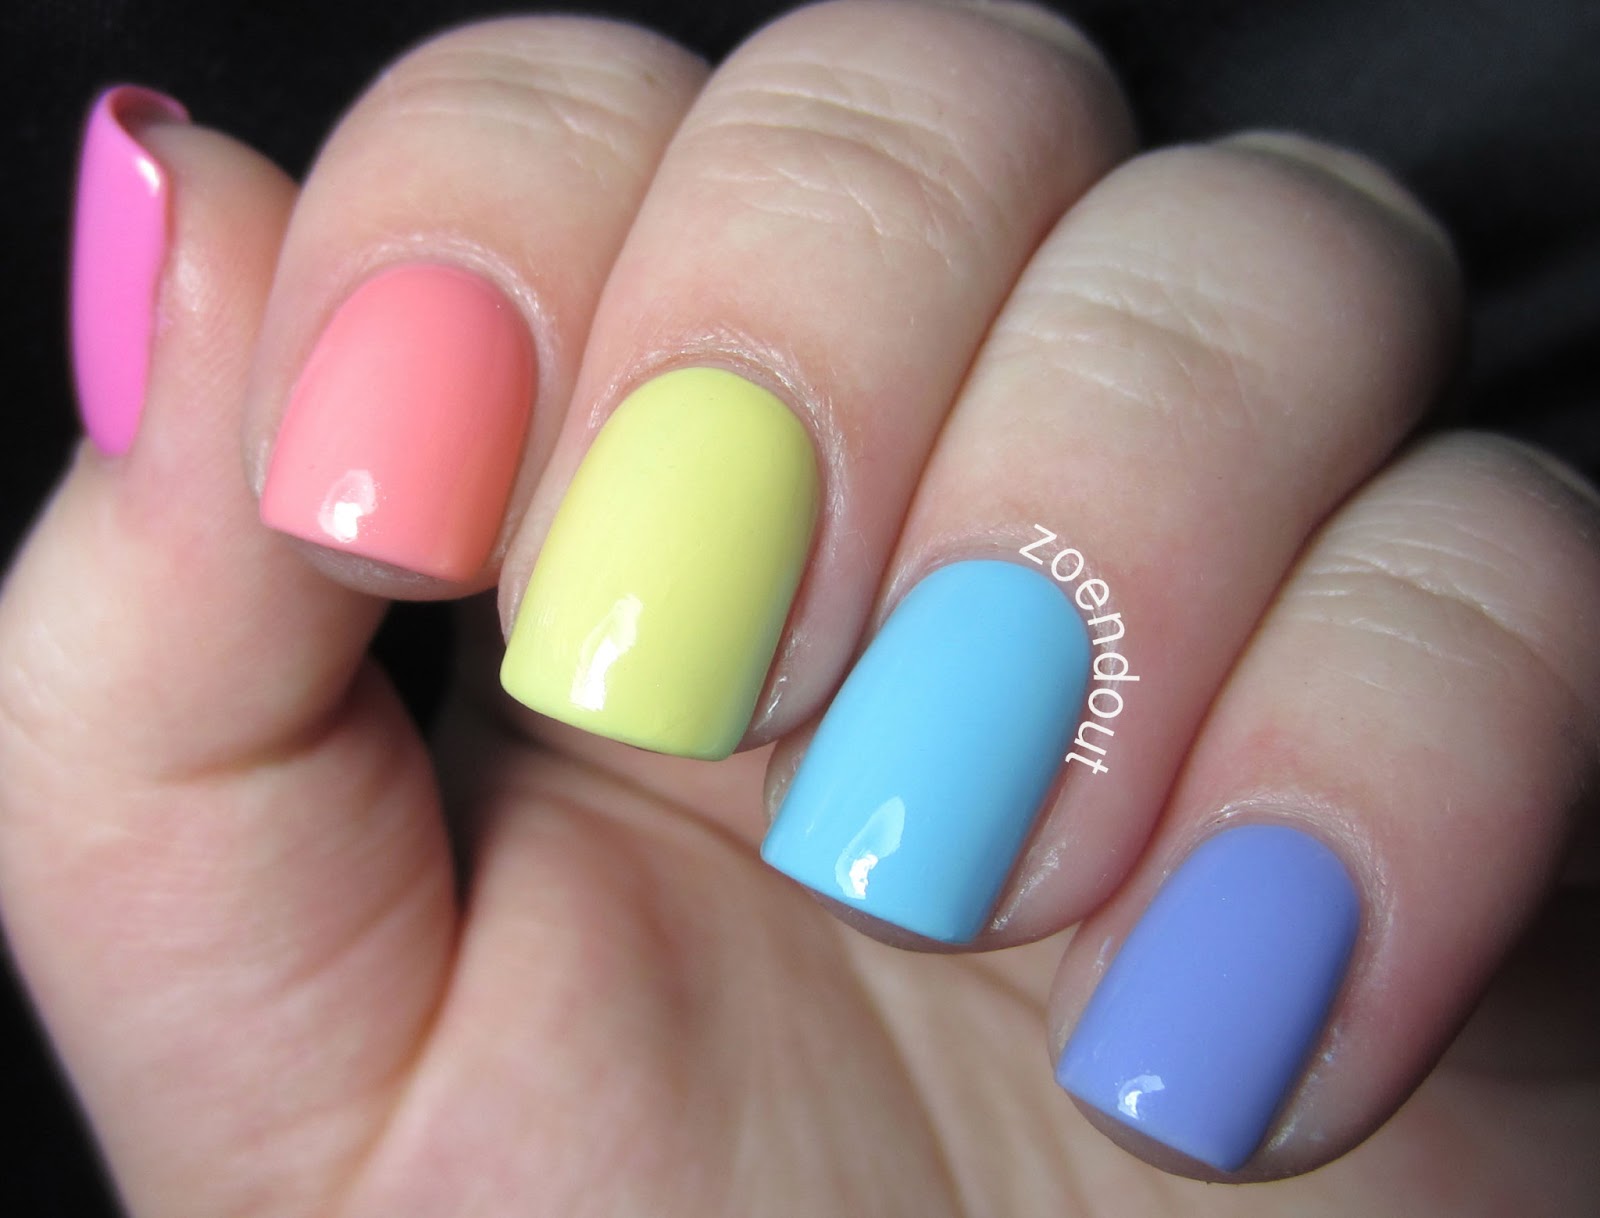 4. "Rainbow Nails: Each Nail a Different Color for a Bold and Bright Look" - wide 4